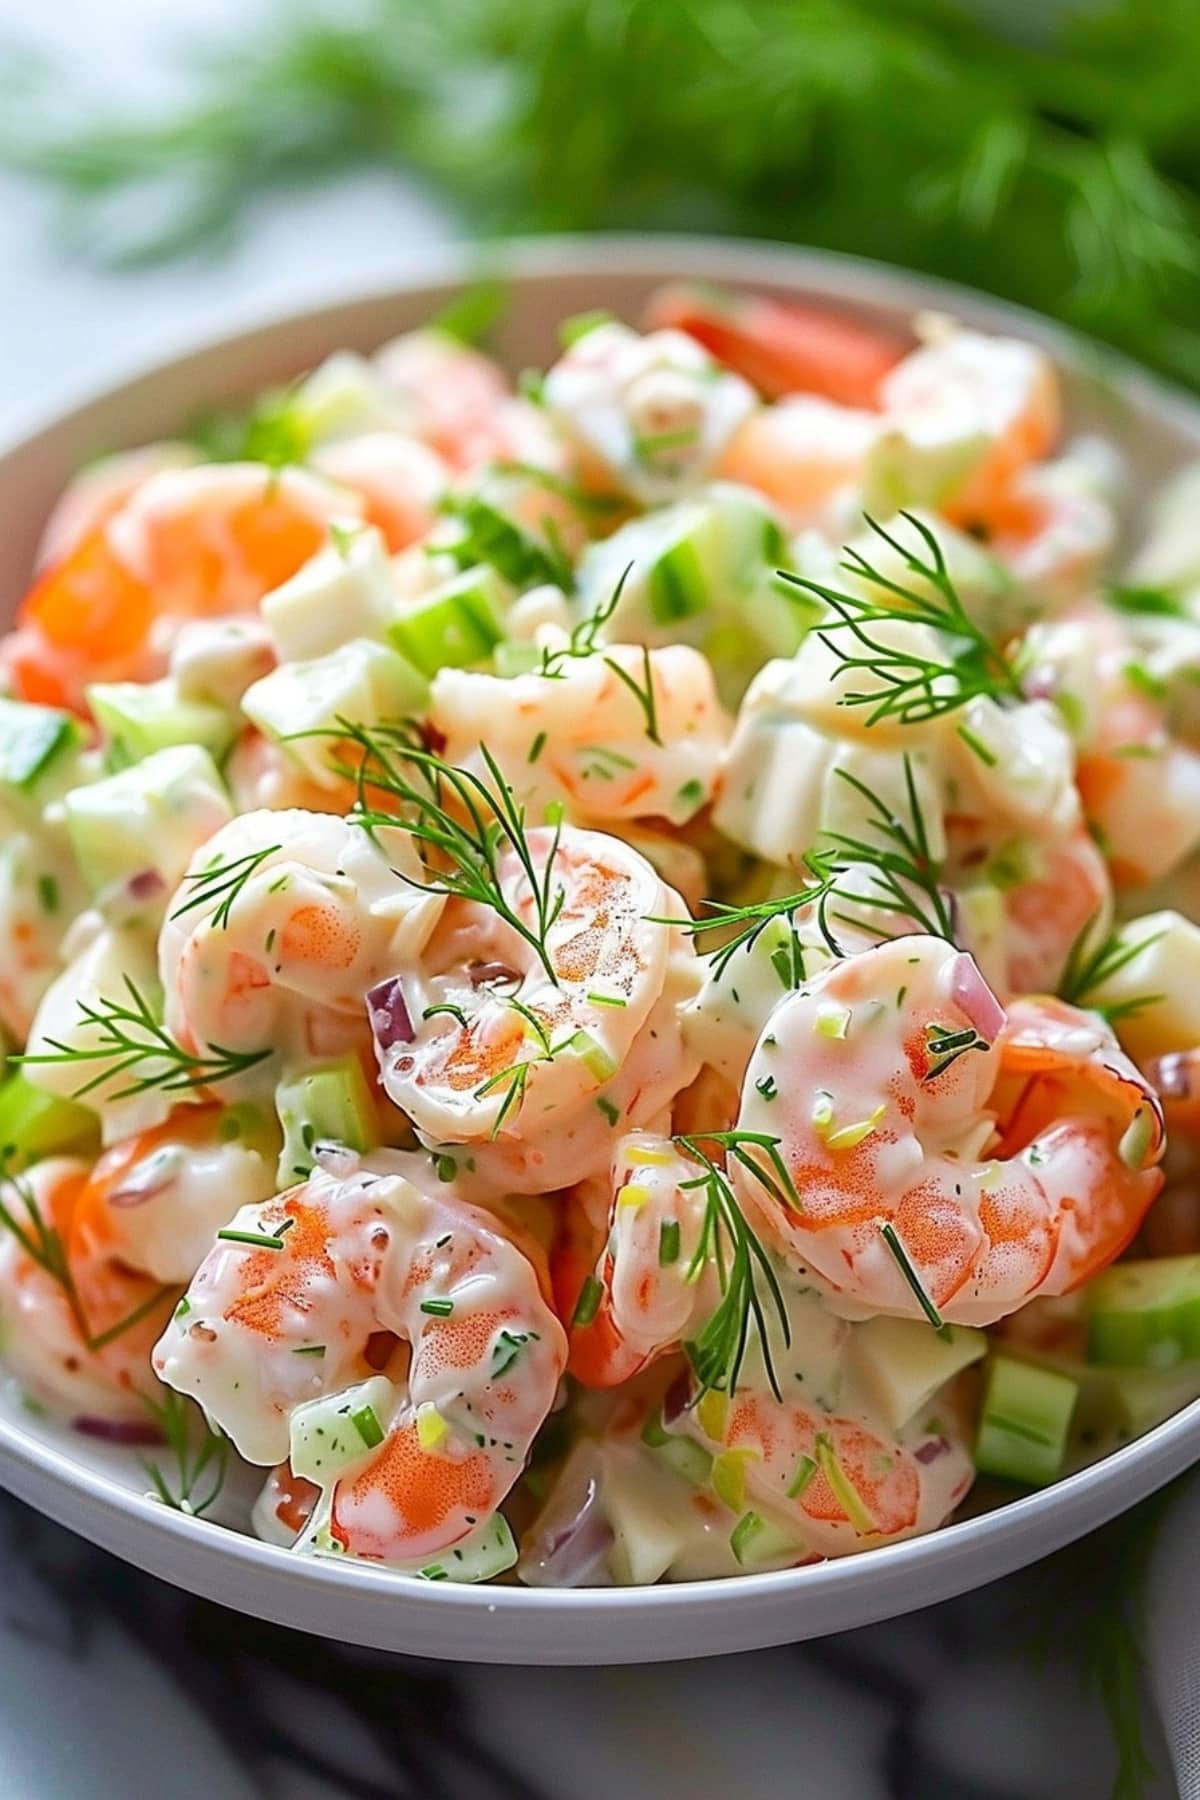 Shrimp salad with chopped celery, onion and mayonnaise dressing in a white plate garnished with dill.